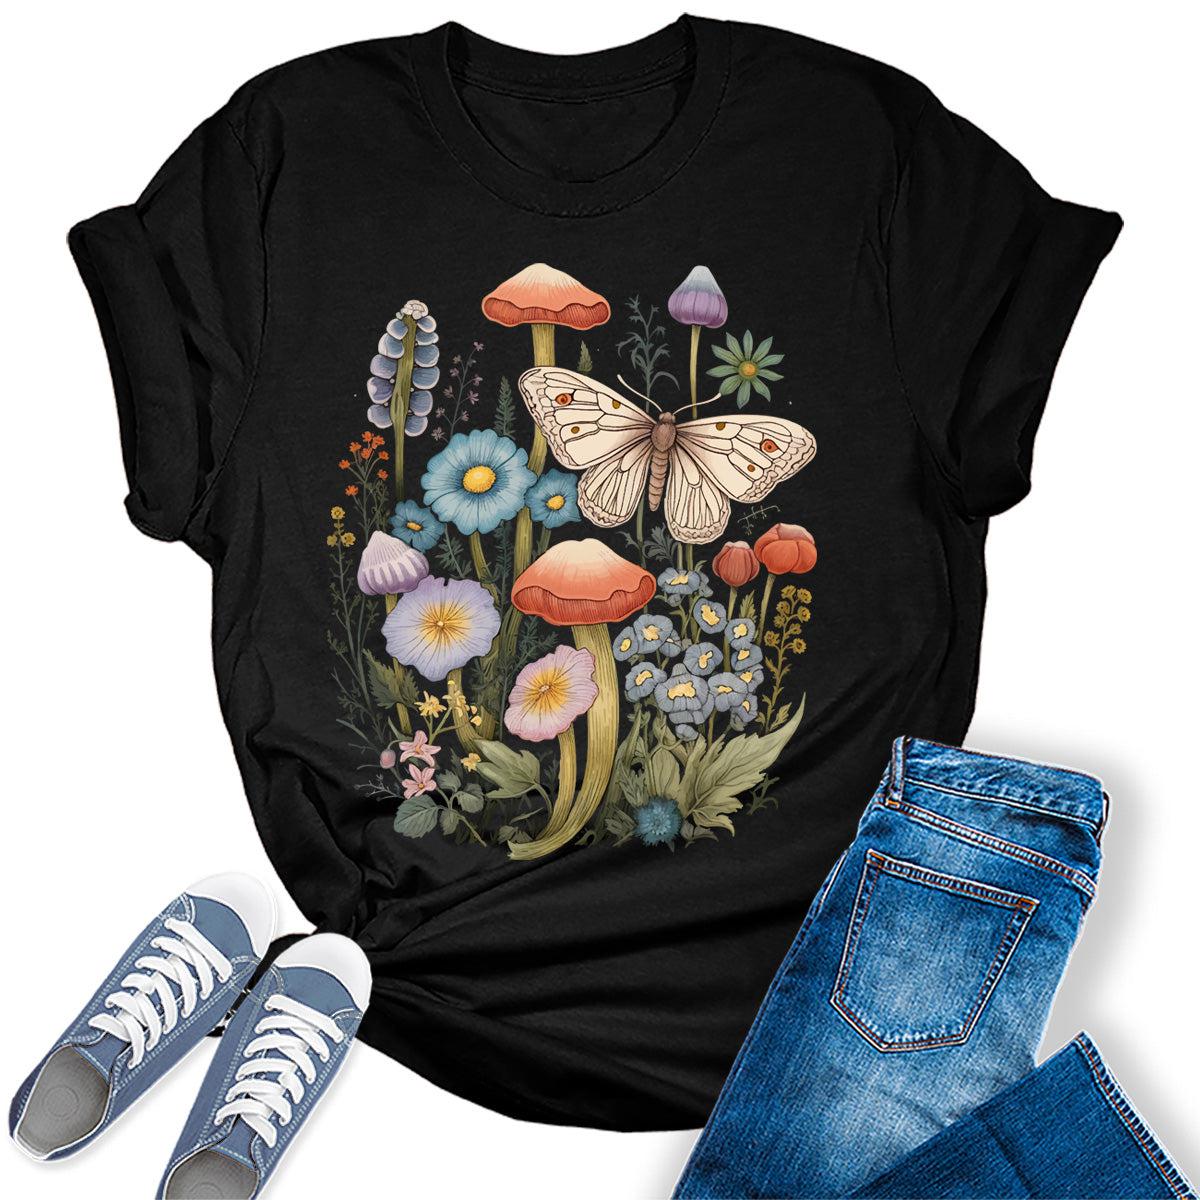 Cute Aesthetic Cottagecore Butterfly Mushroom Graphic Tees for Women